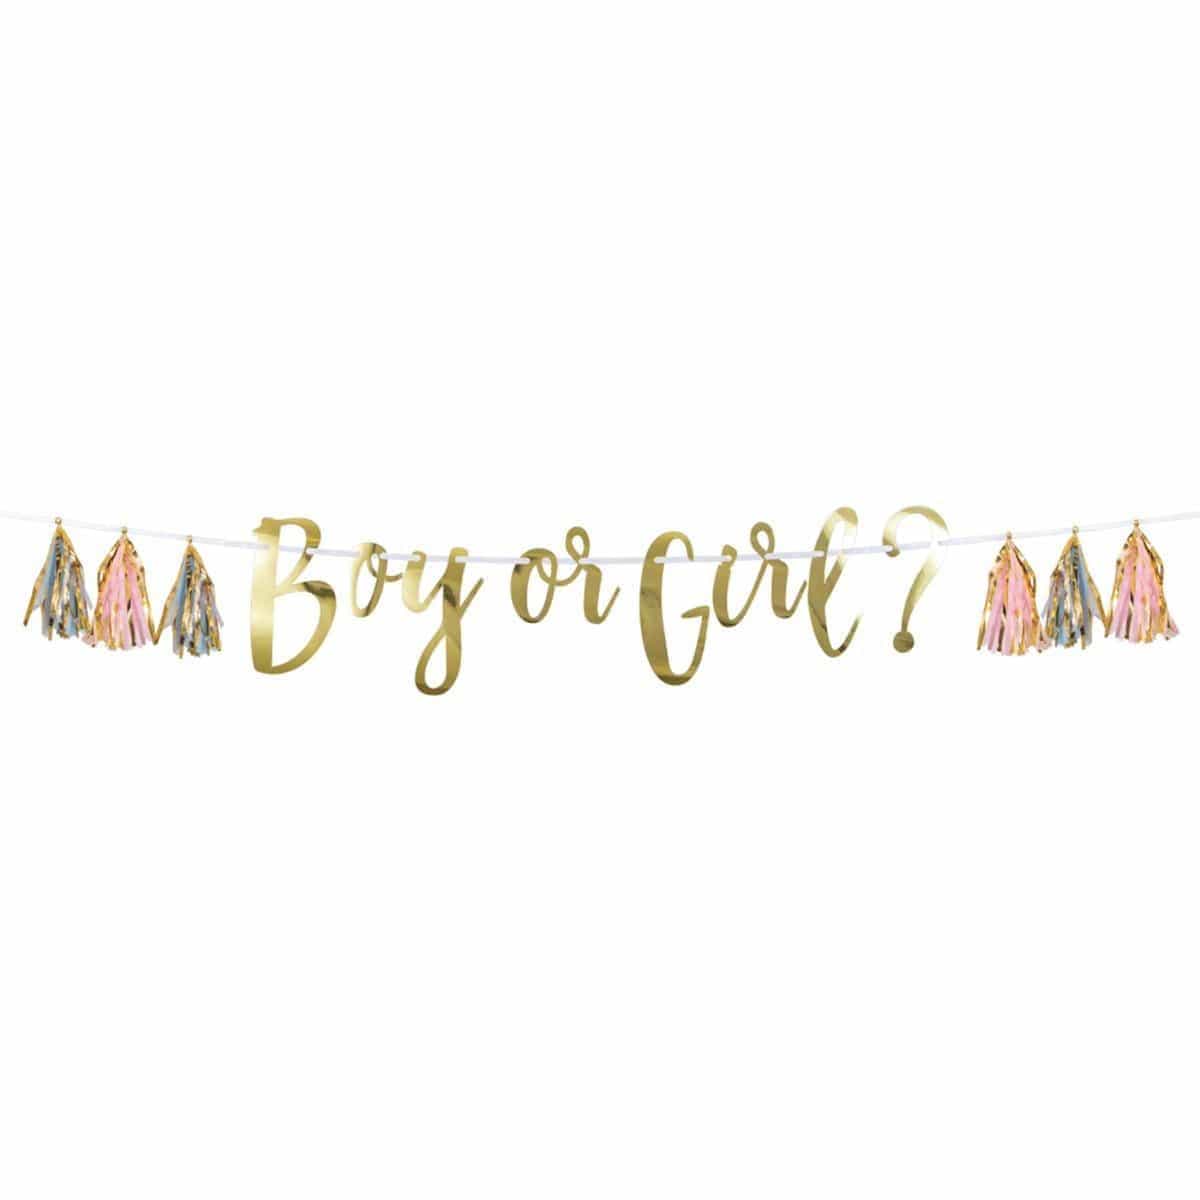 Buy Baby Shower Boy Or Girl? Banner With Tassel sold at Party Expert